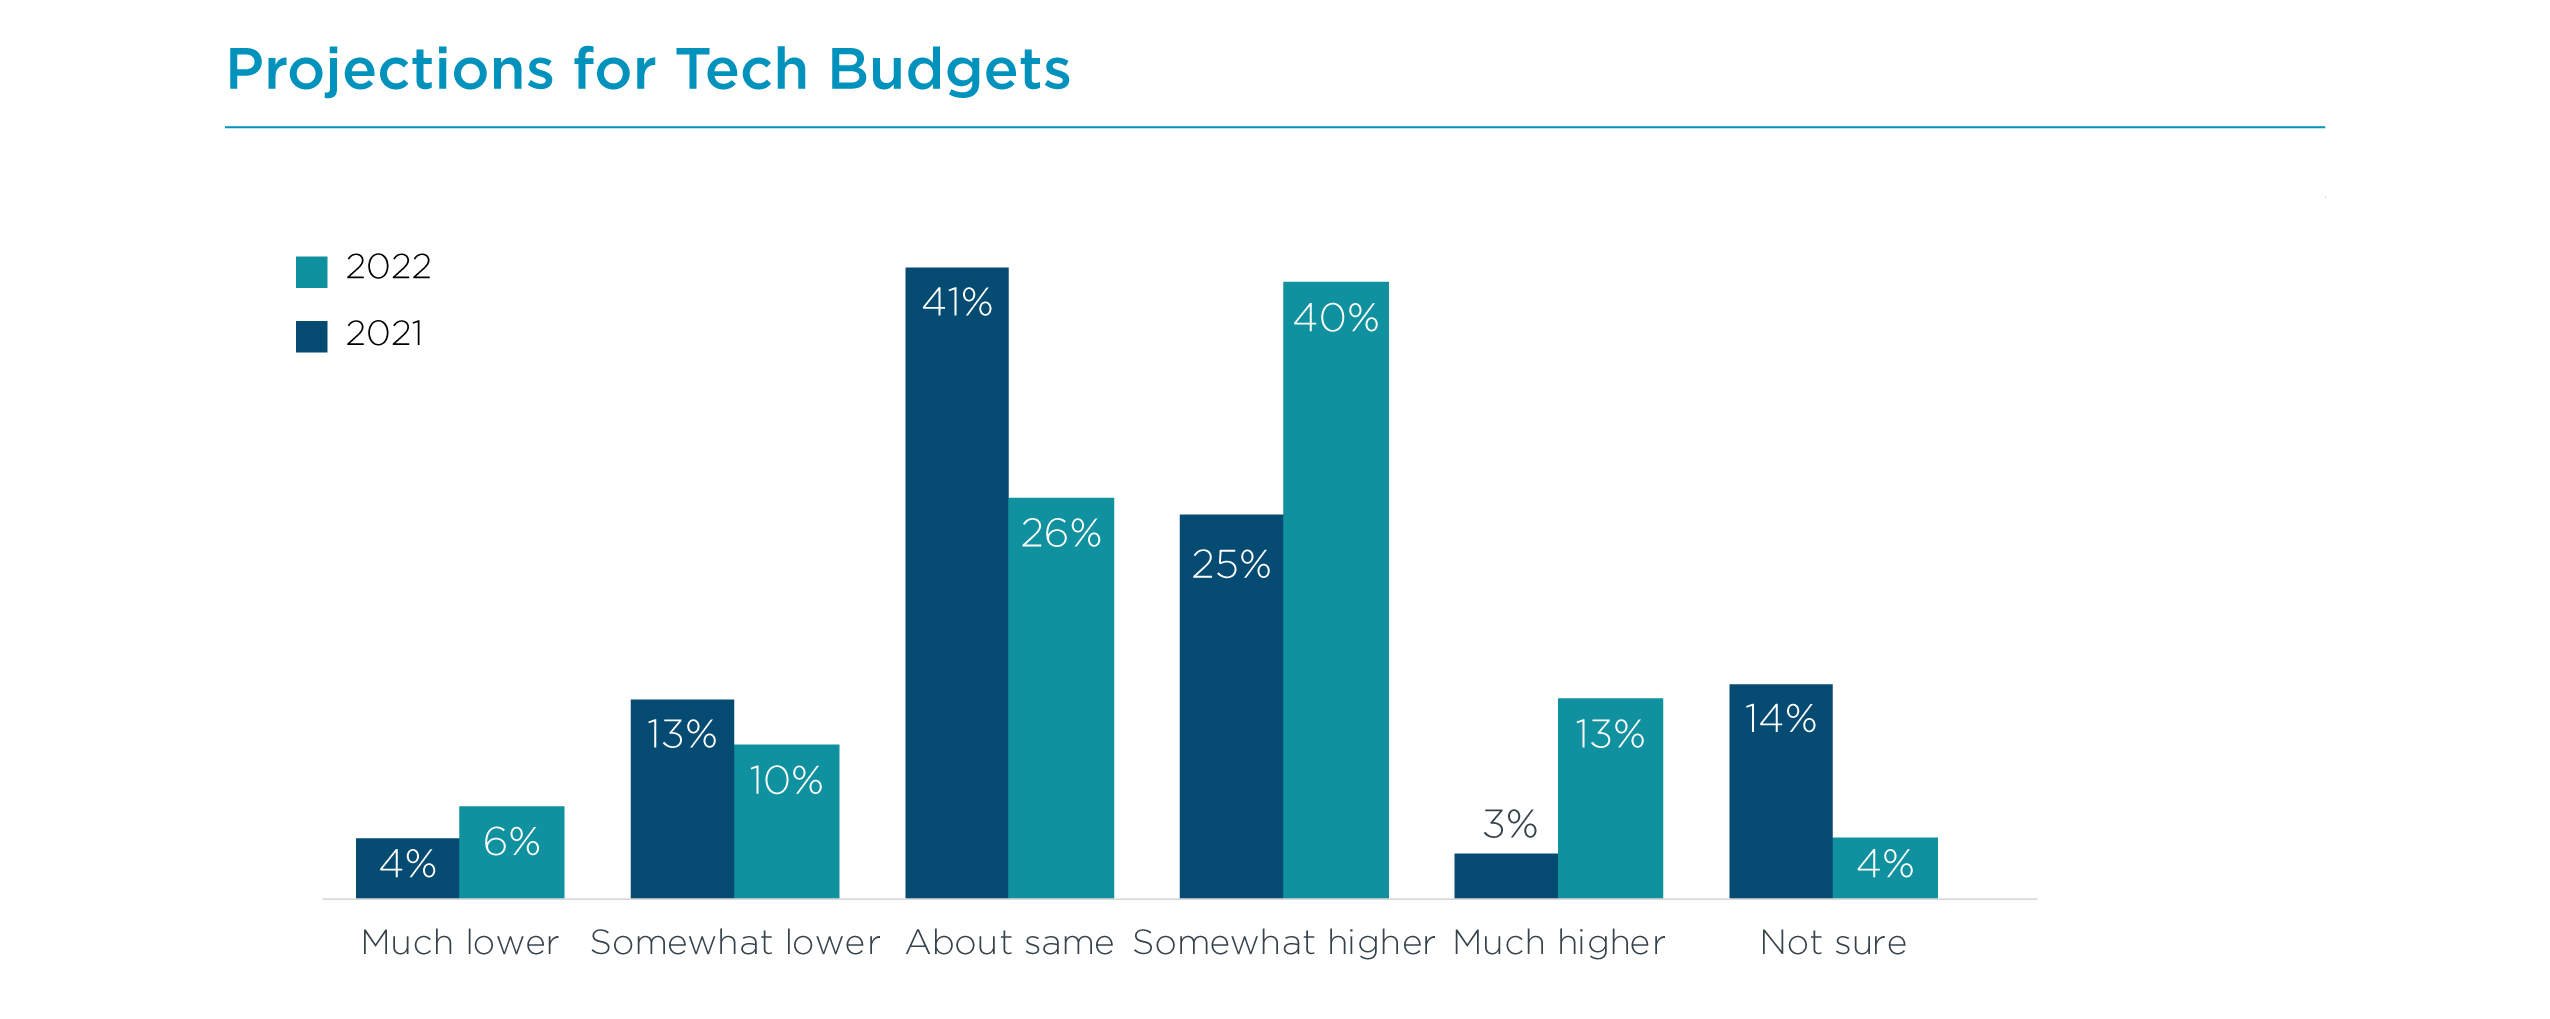 Projections for Tech Budgets